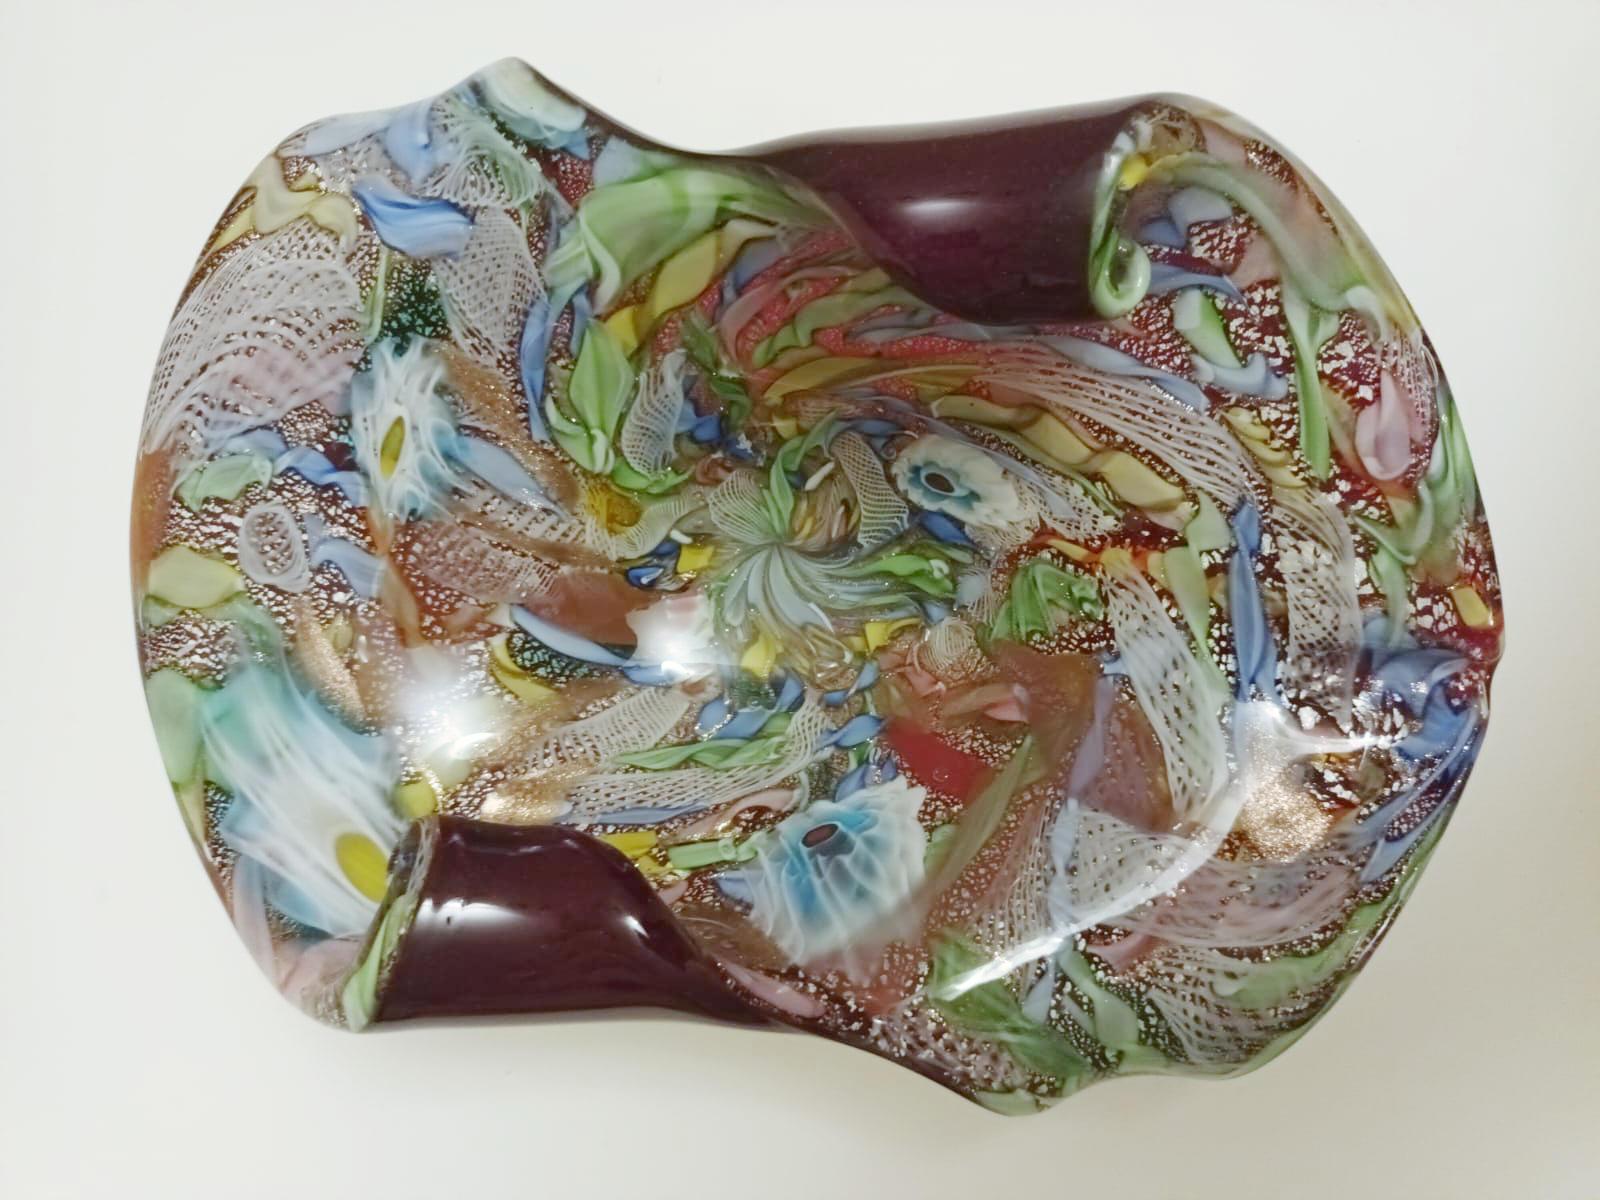 Vintage Italian multicolored Murano ashtray or bowl infused with silver and gold flecks / Made in Italy, circa 1960s
Measures: width 10 inches, depth 7 inches, height 4 inches
1 available in stock in Italy currently on 20% OFF SALE for $1,199